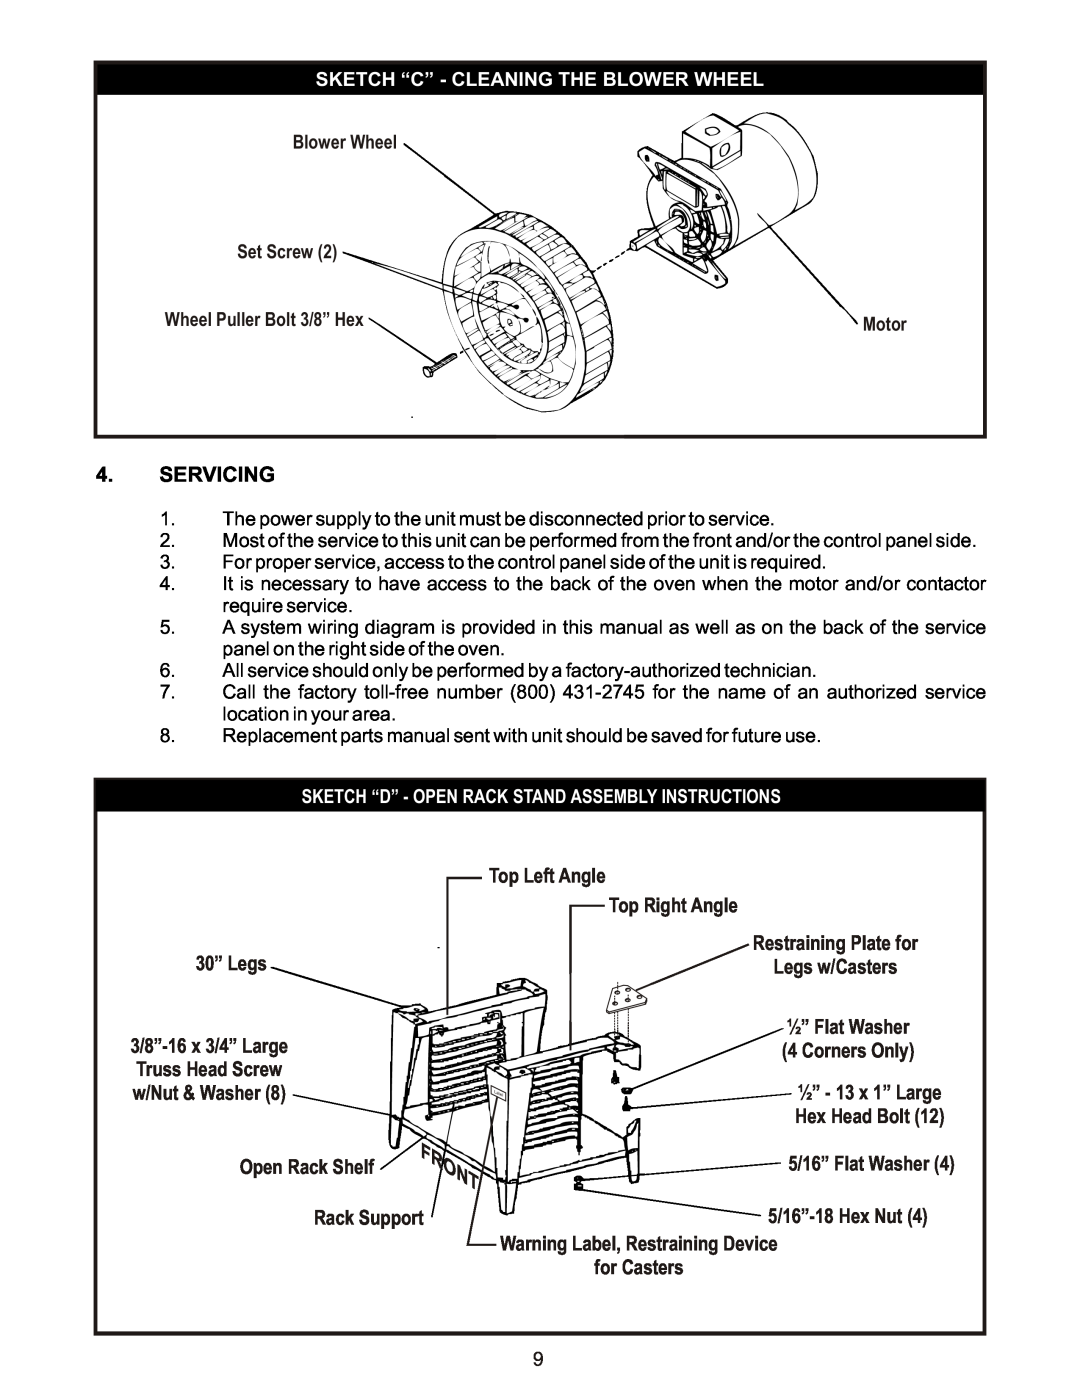 Bakers Pride Oven CO-11E manual Servicing, Sketch “C” - Cleaning The Blower Wheel, Set Screw, Wheel Puller Bolt 3/8” Hex 